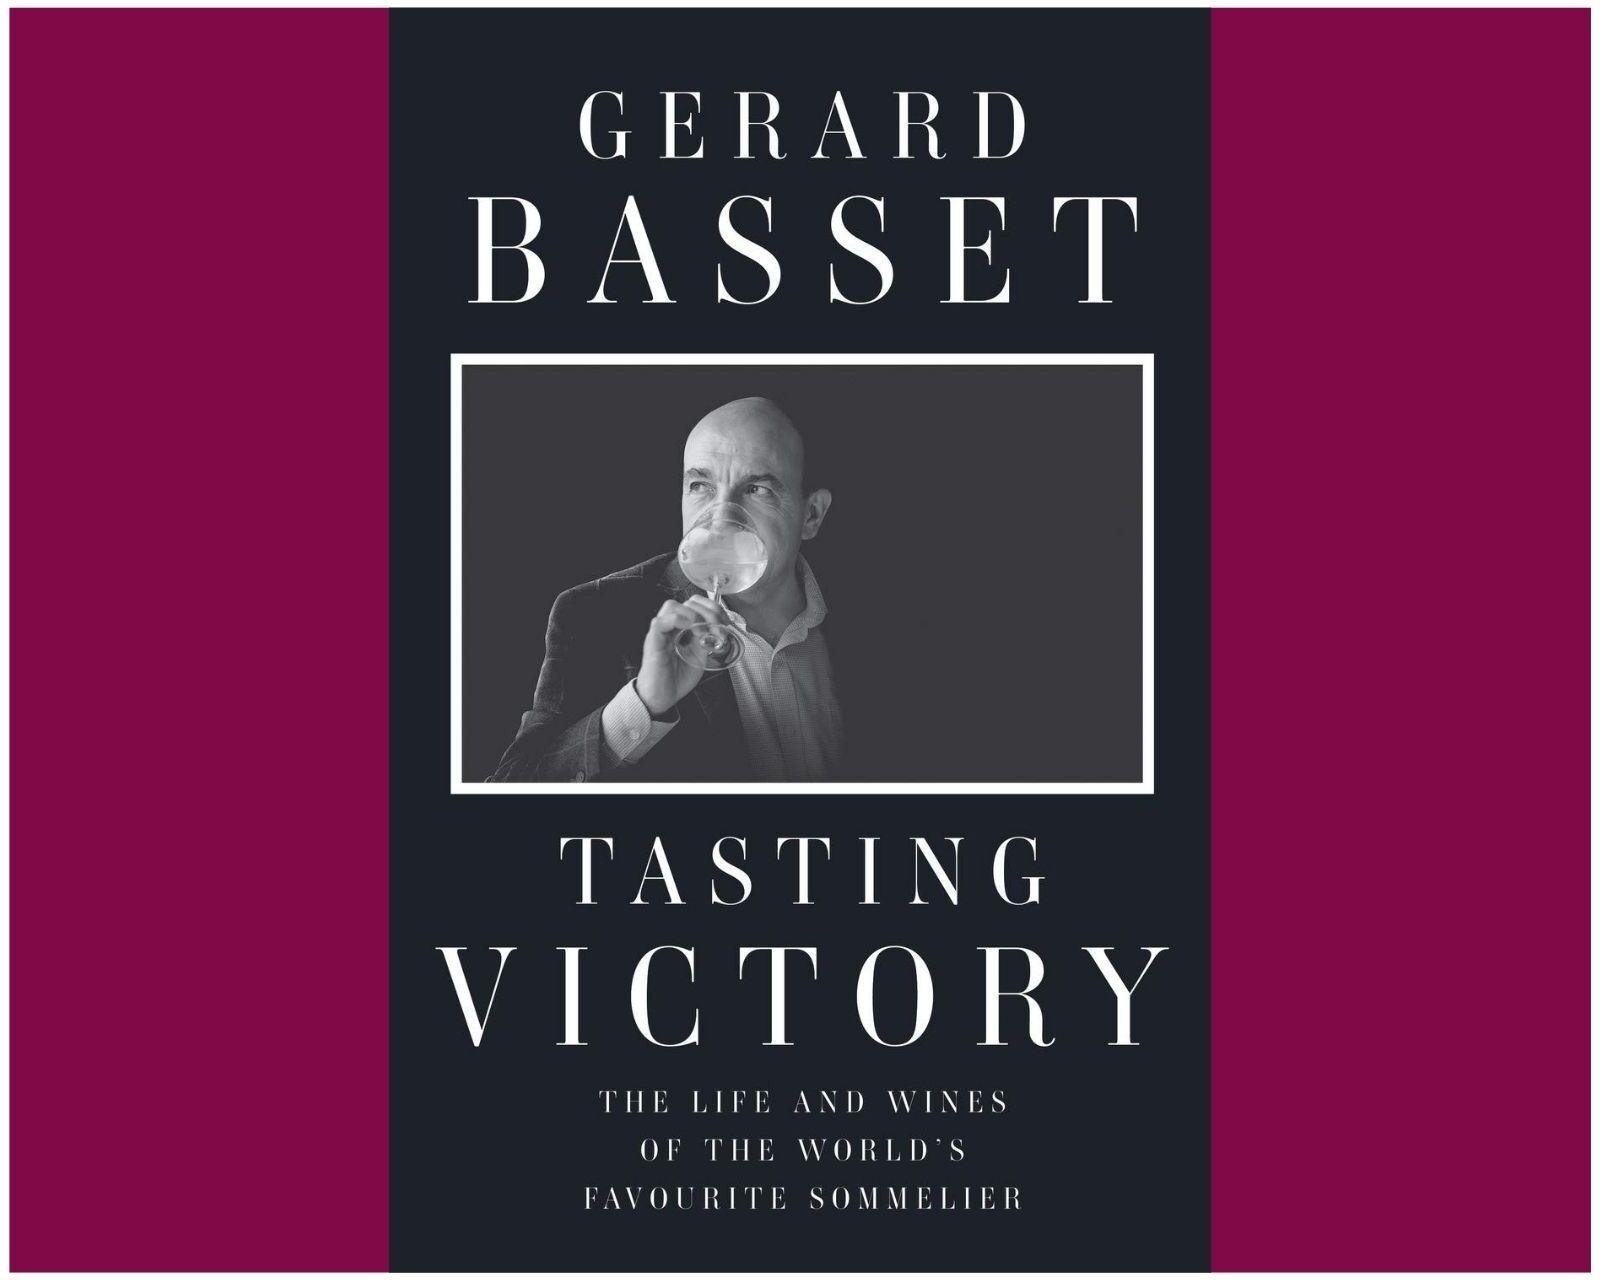 The winner of the Ambassador of the Year nomination will receive a book by Gerard Basset